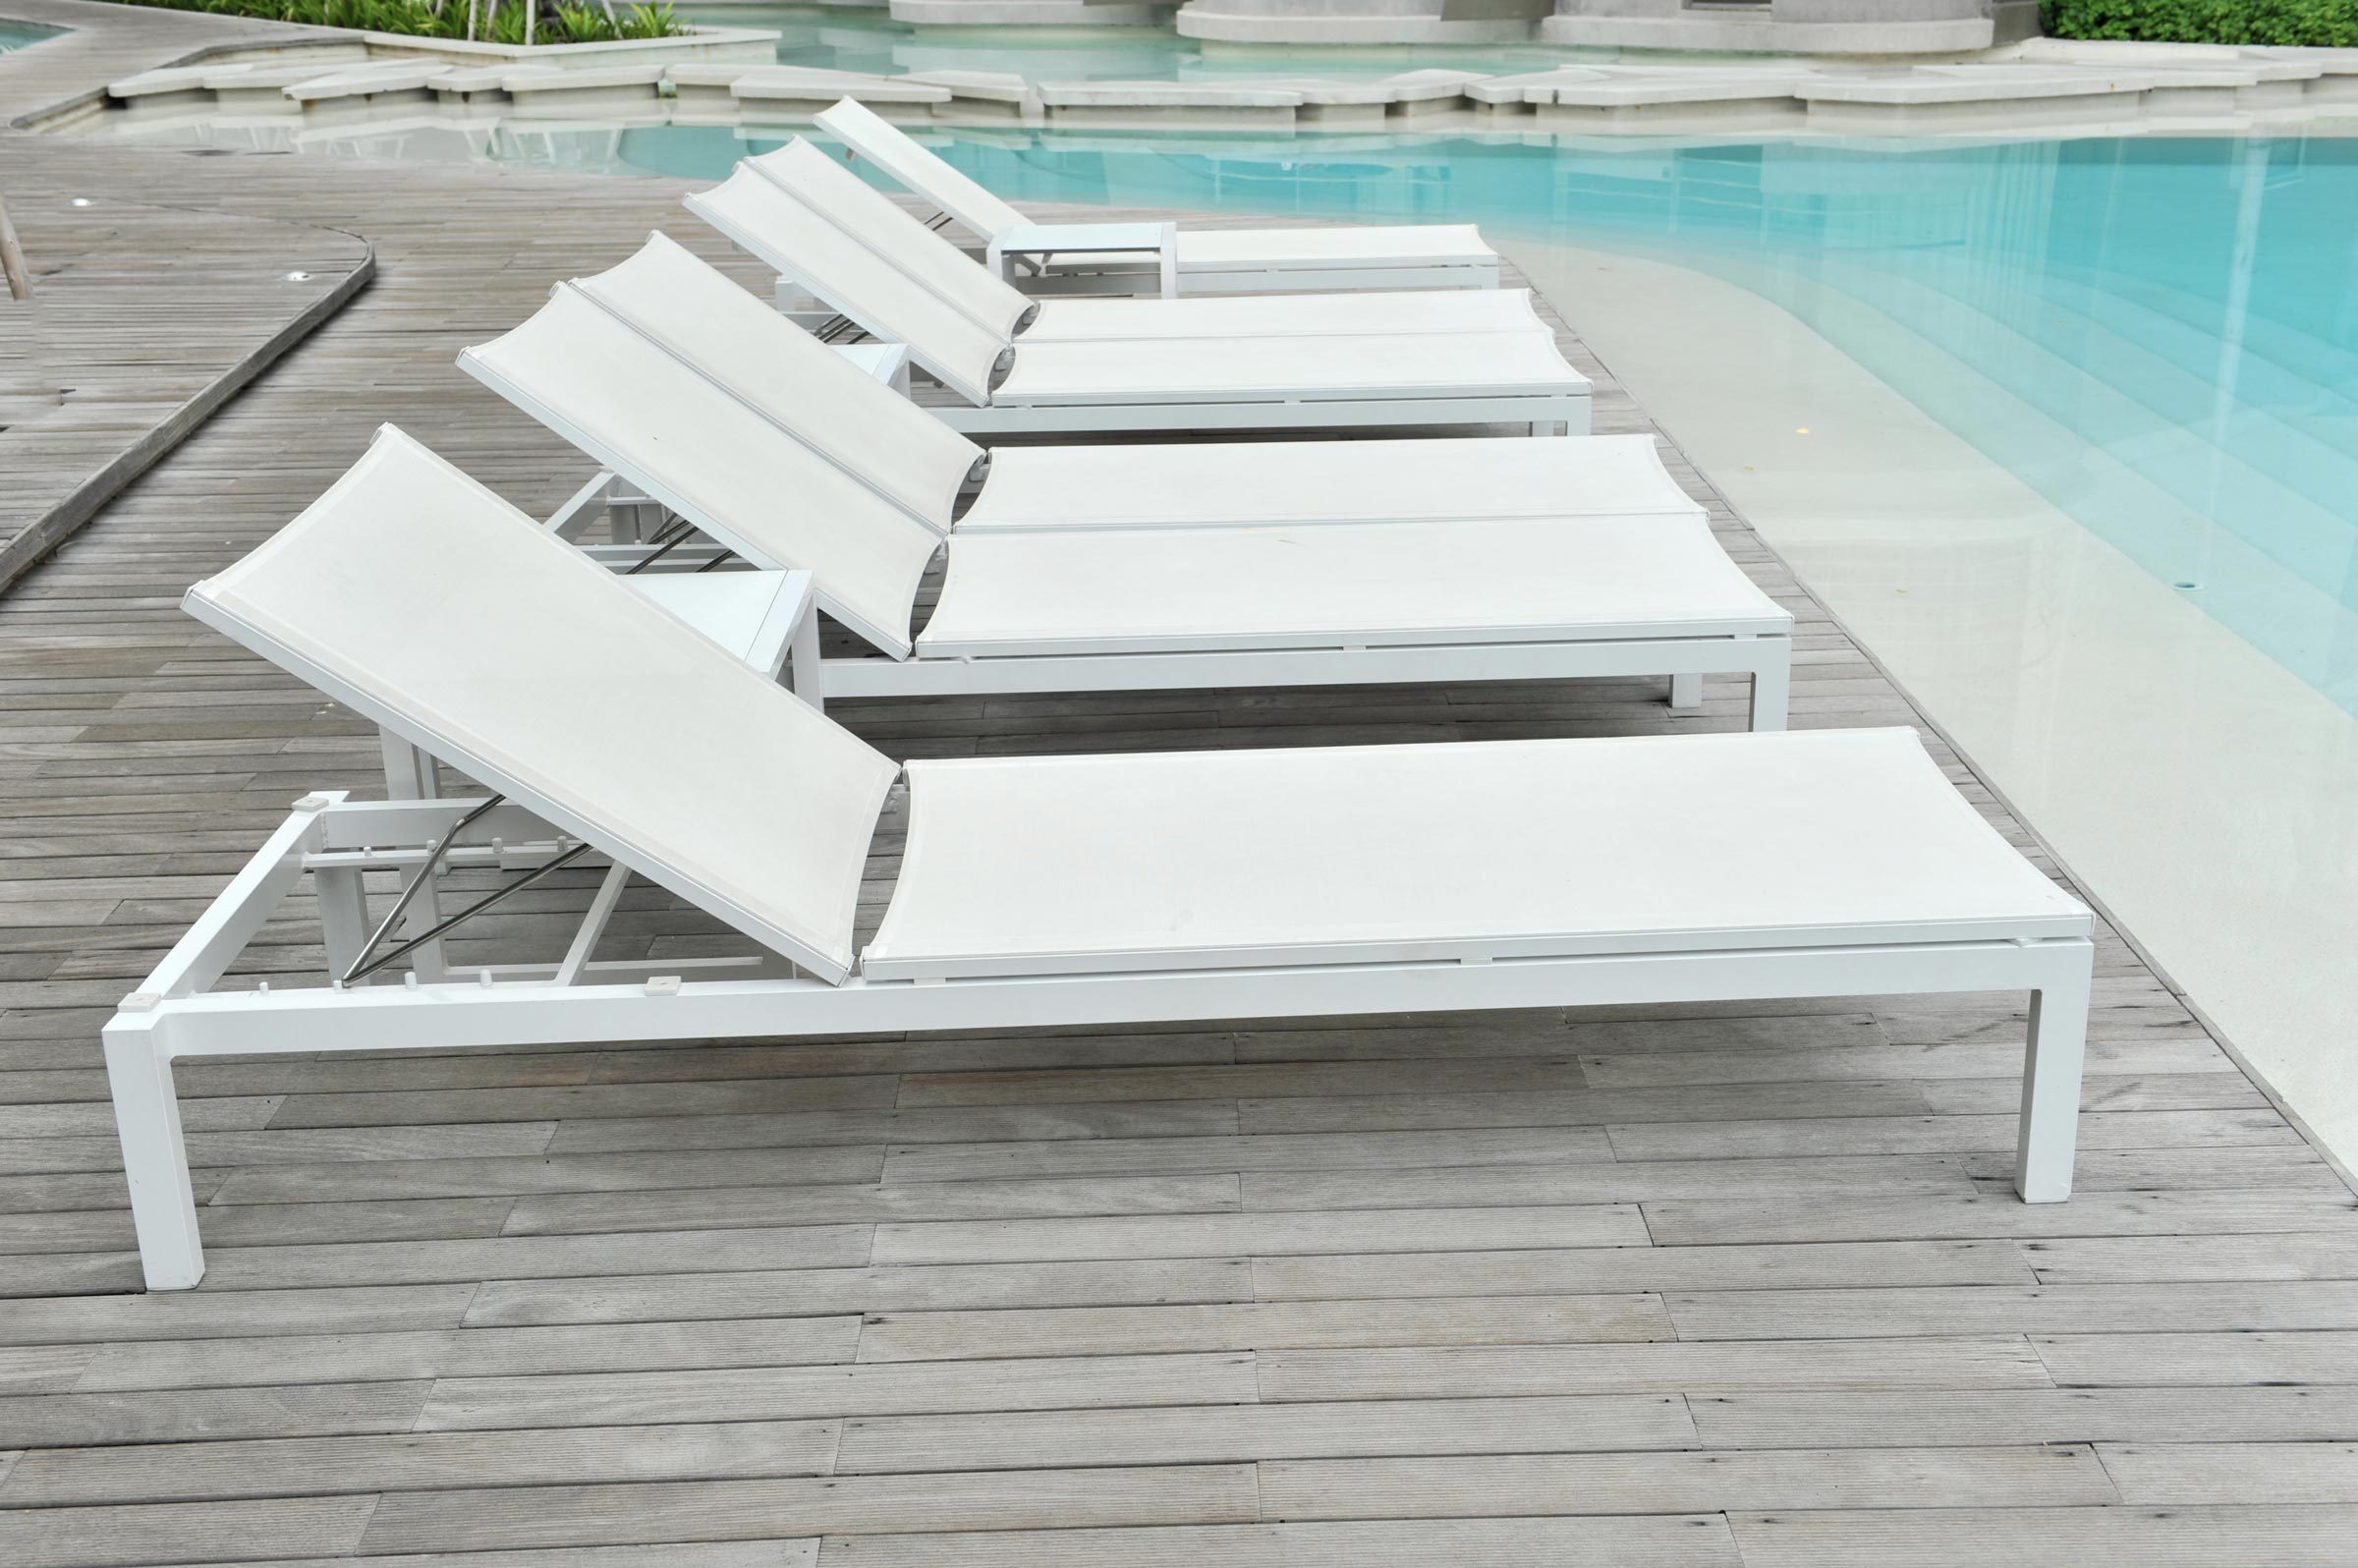 outdoor lounge chairs by the pool in summer